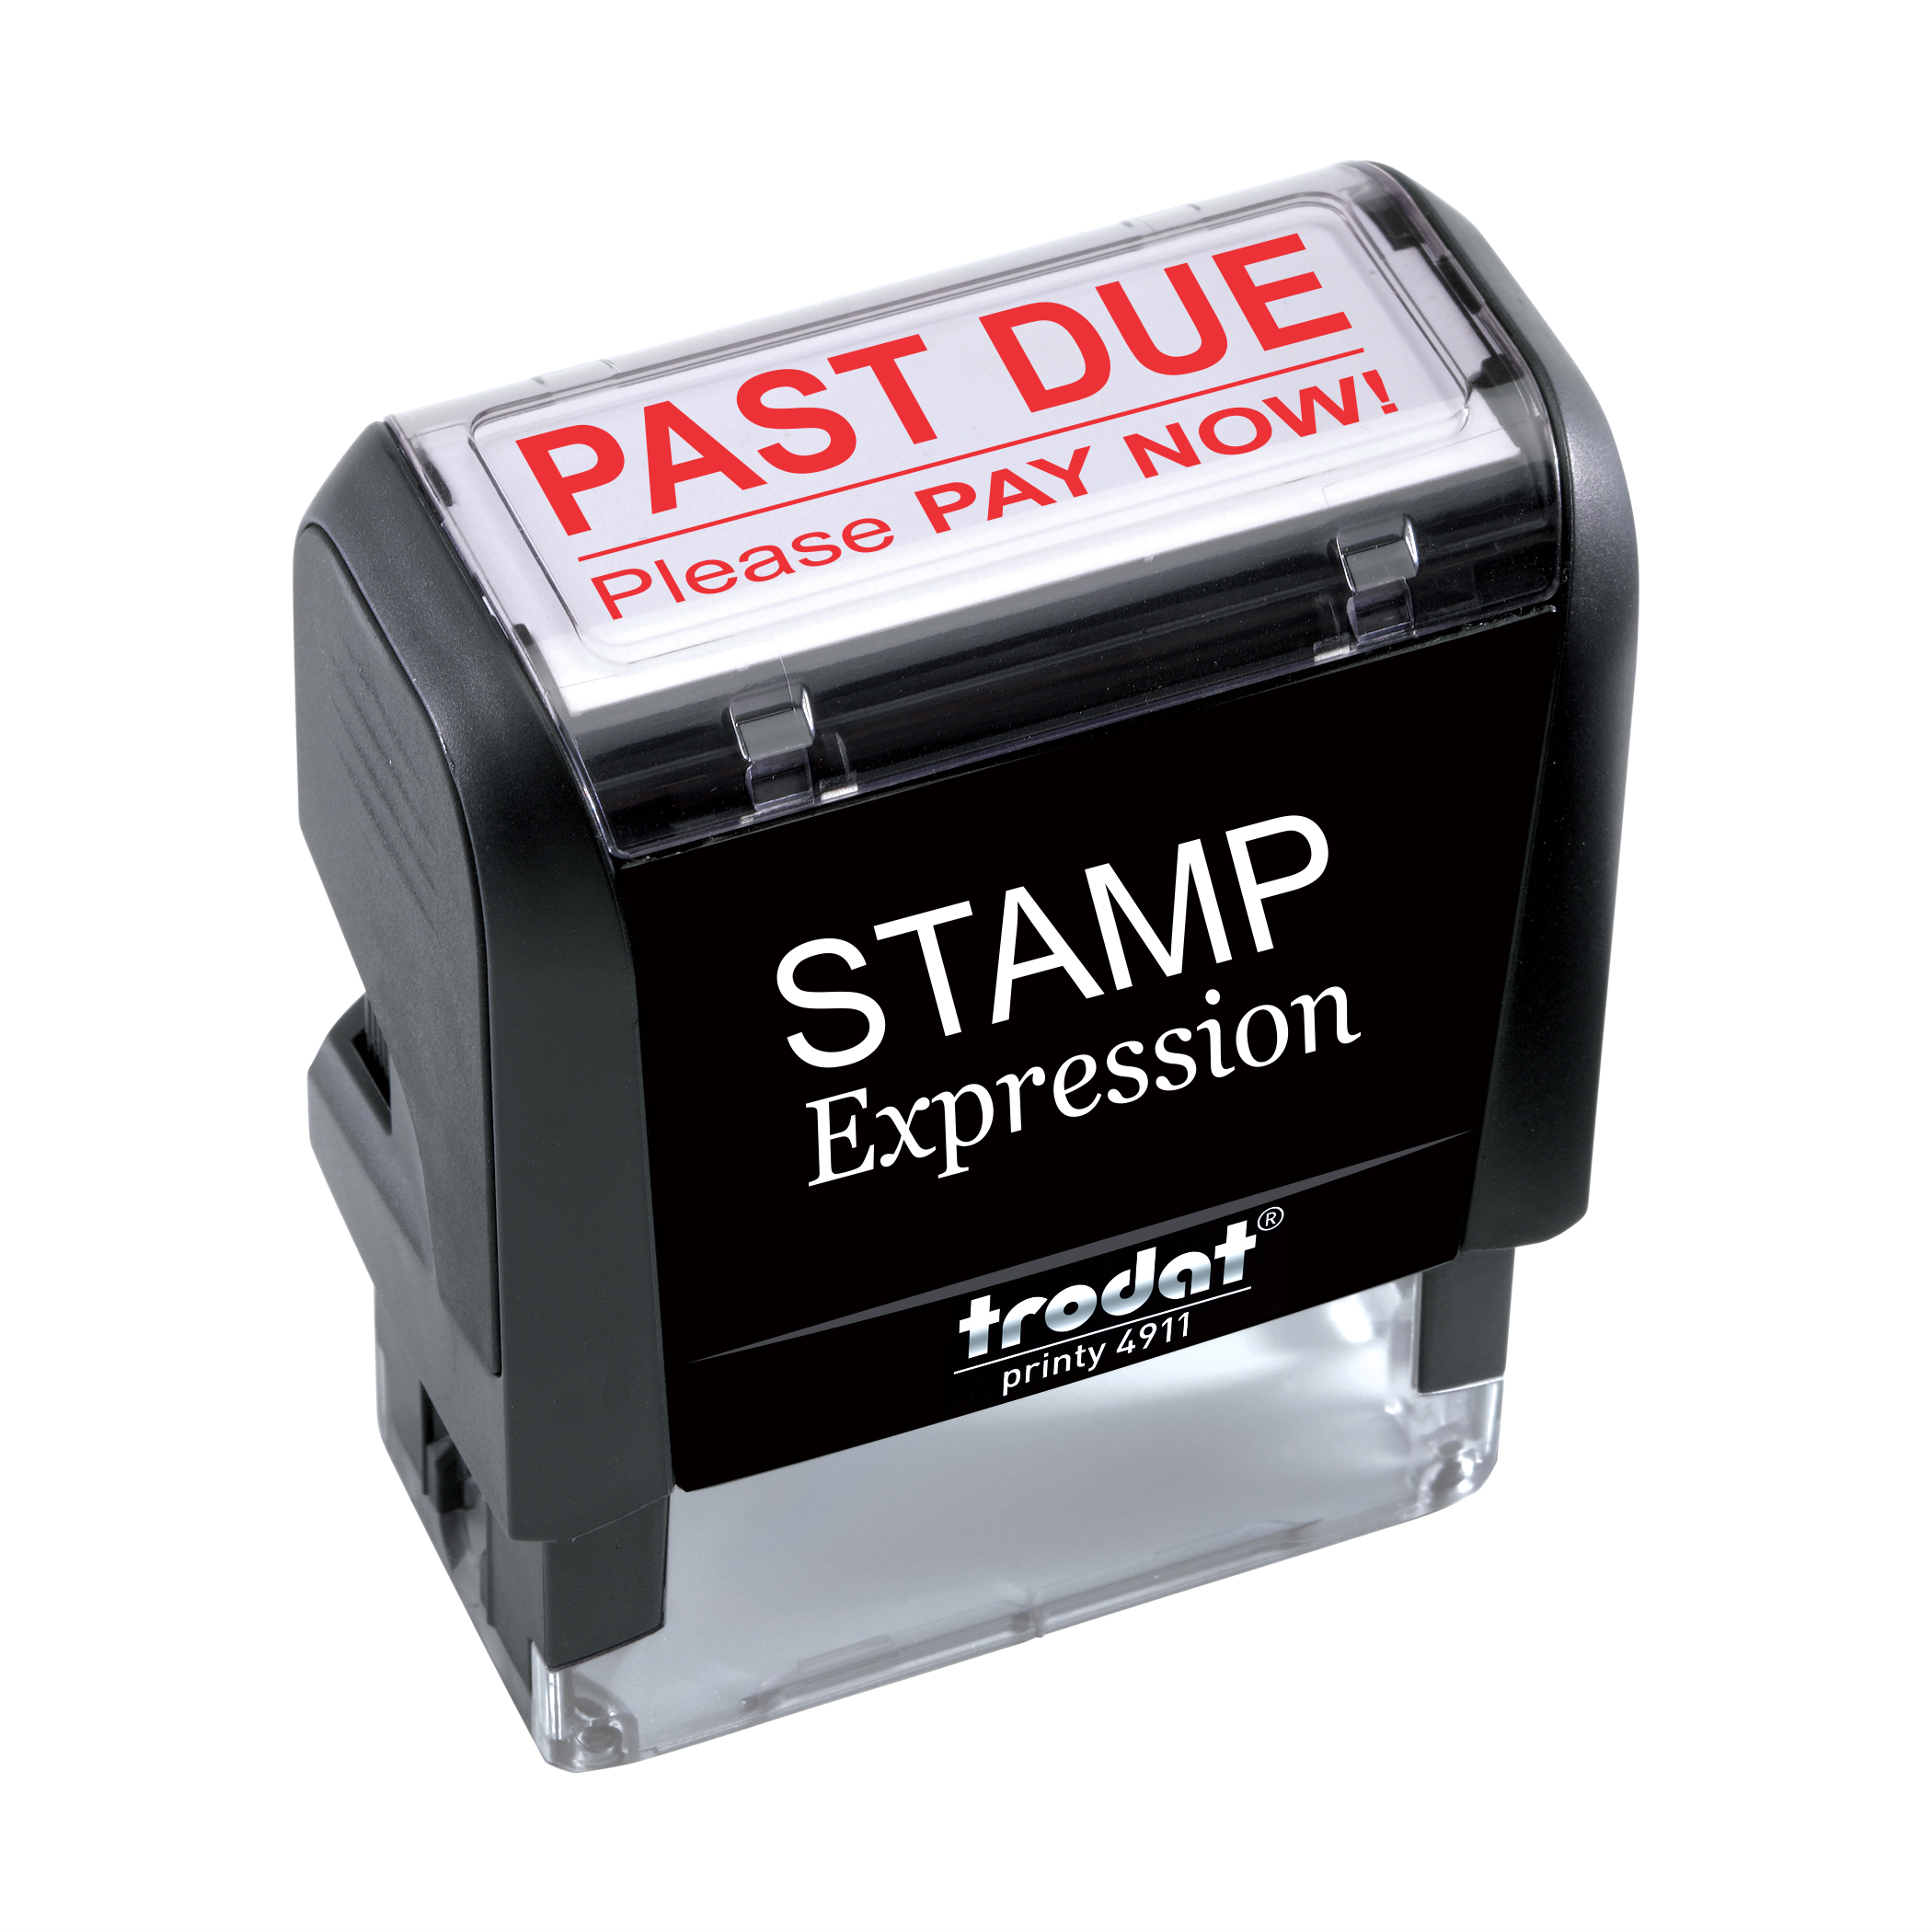 Past Due Please Pay Now Office Self Inking Rubber Stamp